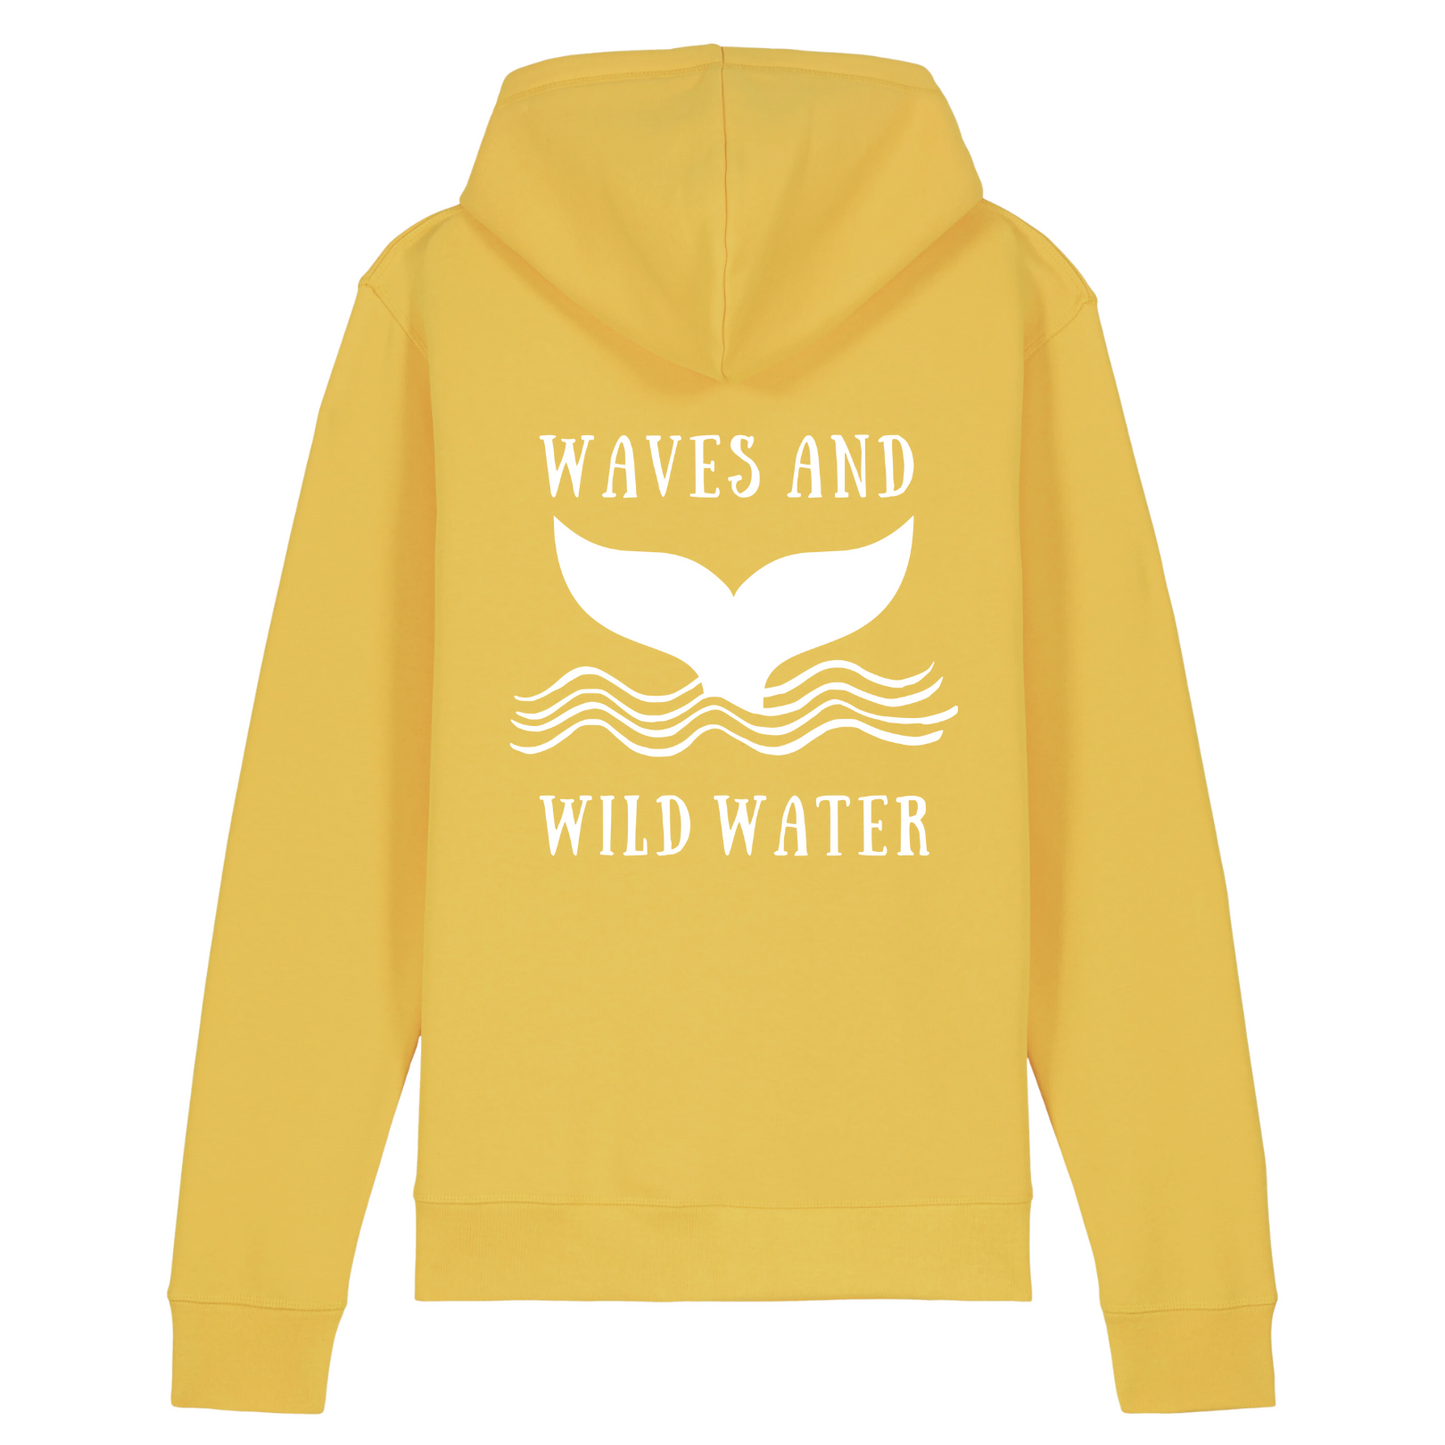 This is our bright yellow hoodie with the Waves and Wild Water logo on the back in white water based ink. The whale tail emerging from the waves in our logo makes this hoodie the perfect accompaniment to any wild swimming adventure.